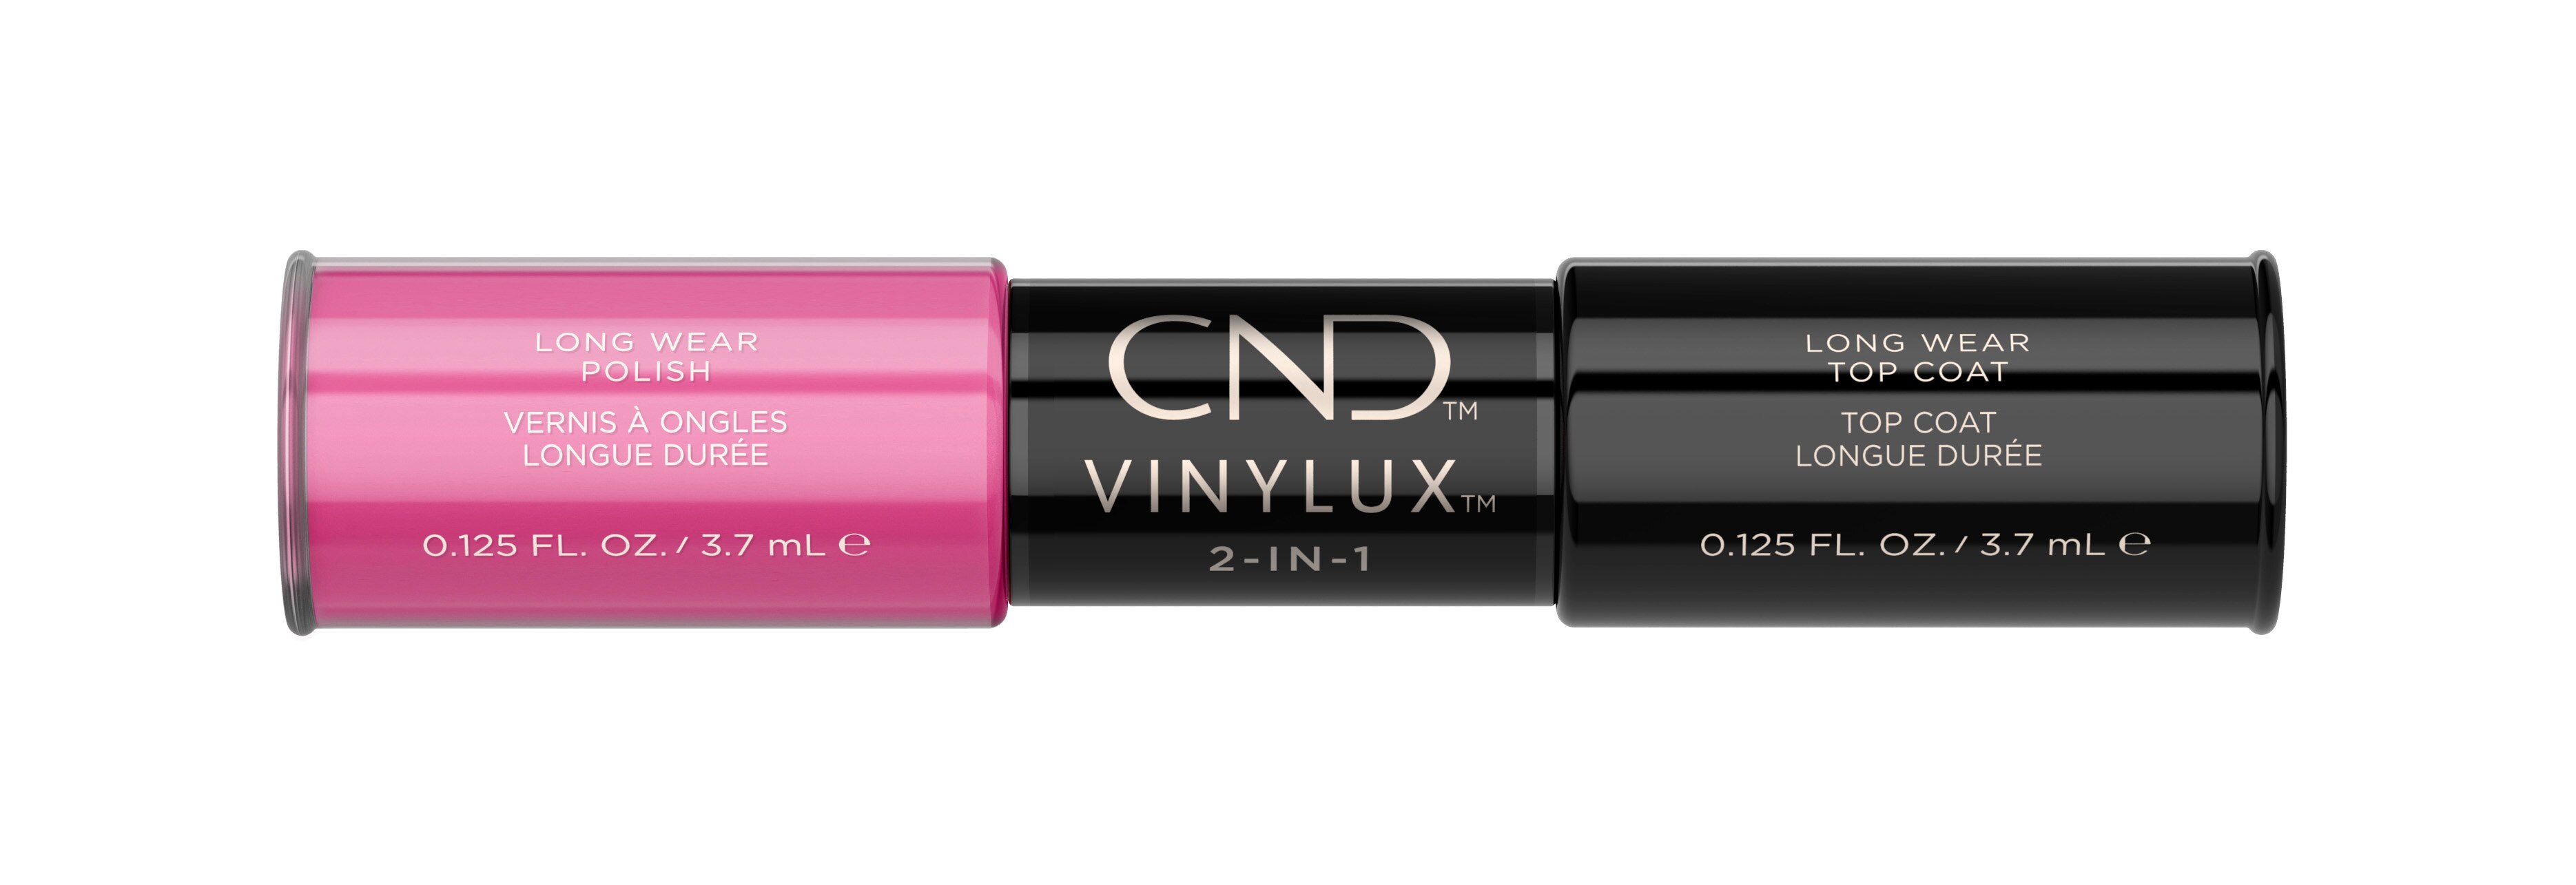 9. CND Vinylux Long Wear Nail Polish in "A Touch of Color" - wide 11